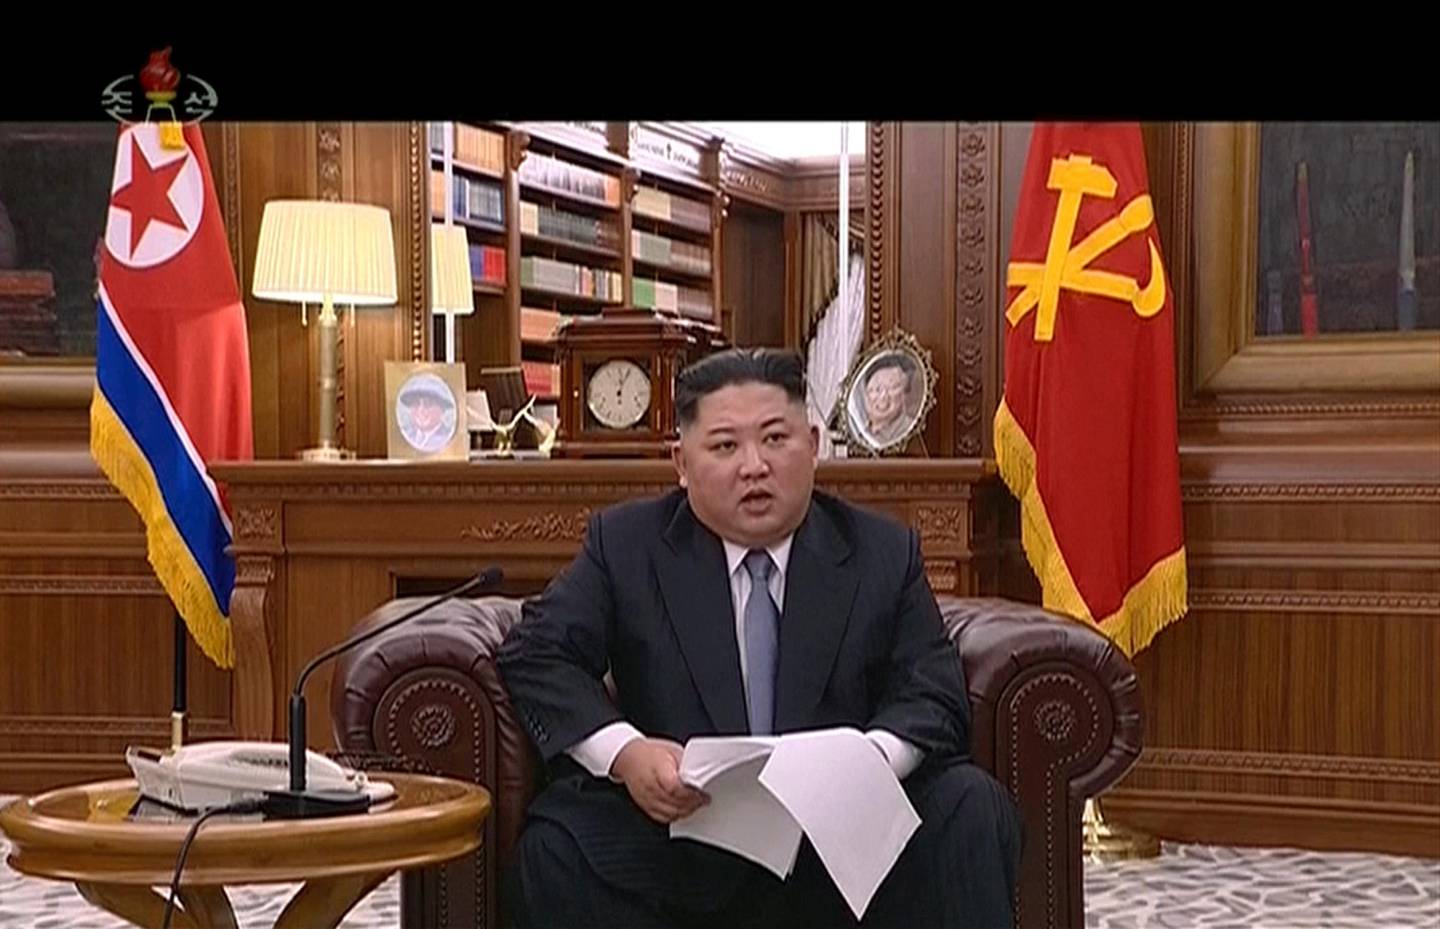 In this undated image from video distributed on Tuesday, Jan. 1, 2019, by North Korean broadcaster KRT, North Korean leader Kim Jong Un delivers a speech in North Korea. Kim says he hopes to extend his high-stakes nuclear summitry with President Donald Trump into 2019, but also warns Washington not to test North Koreans' patience with sanctions and pressure. Kim also during his New Year's speech said the United States should continue to halt its joint military exercises with ally South Korea. Nuclear talks between the countries have stalled.(KRT via AP)